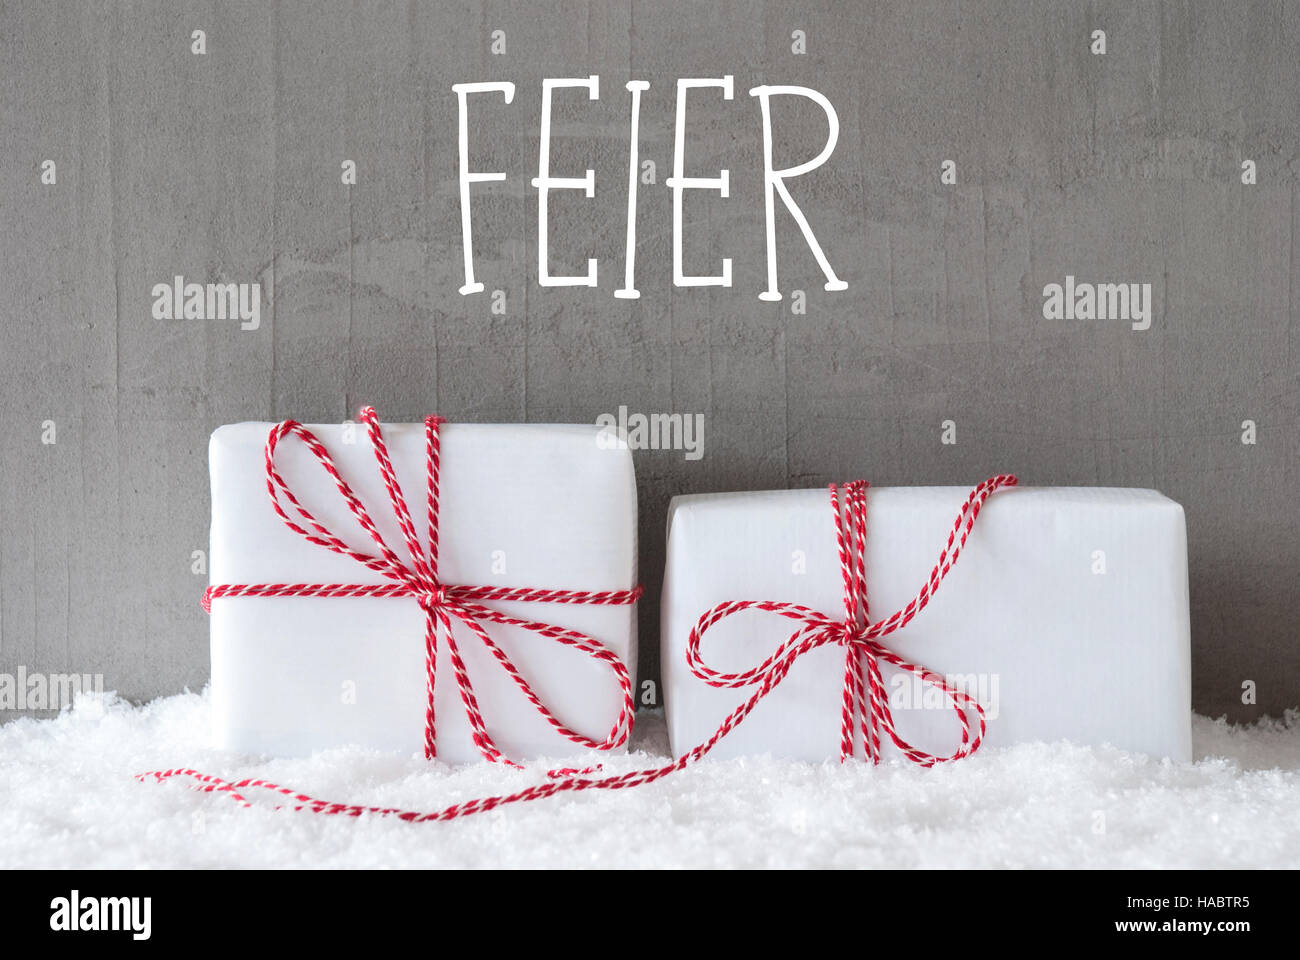 Two Gifts With Snow, Feier Means Celebration Stock Photo